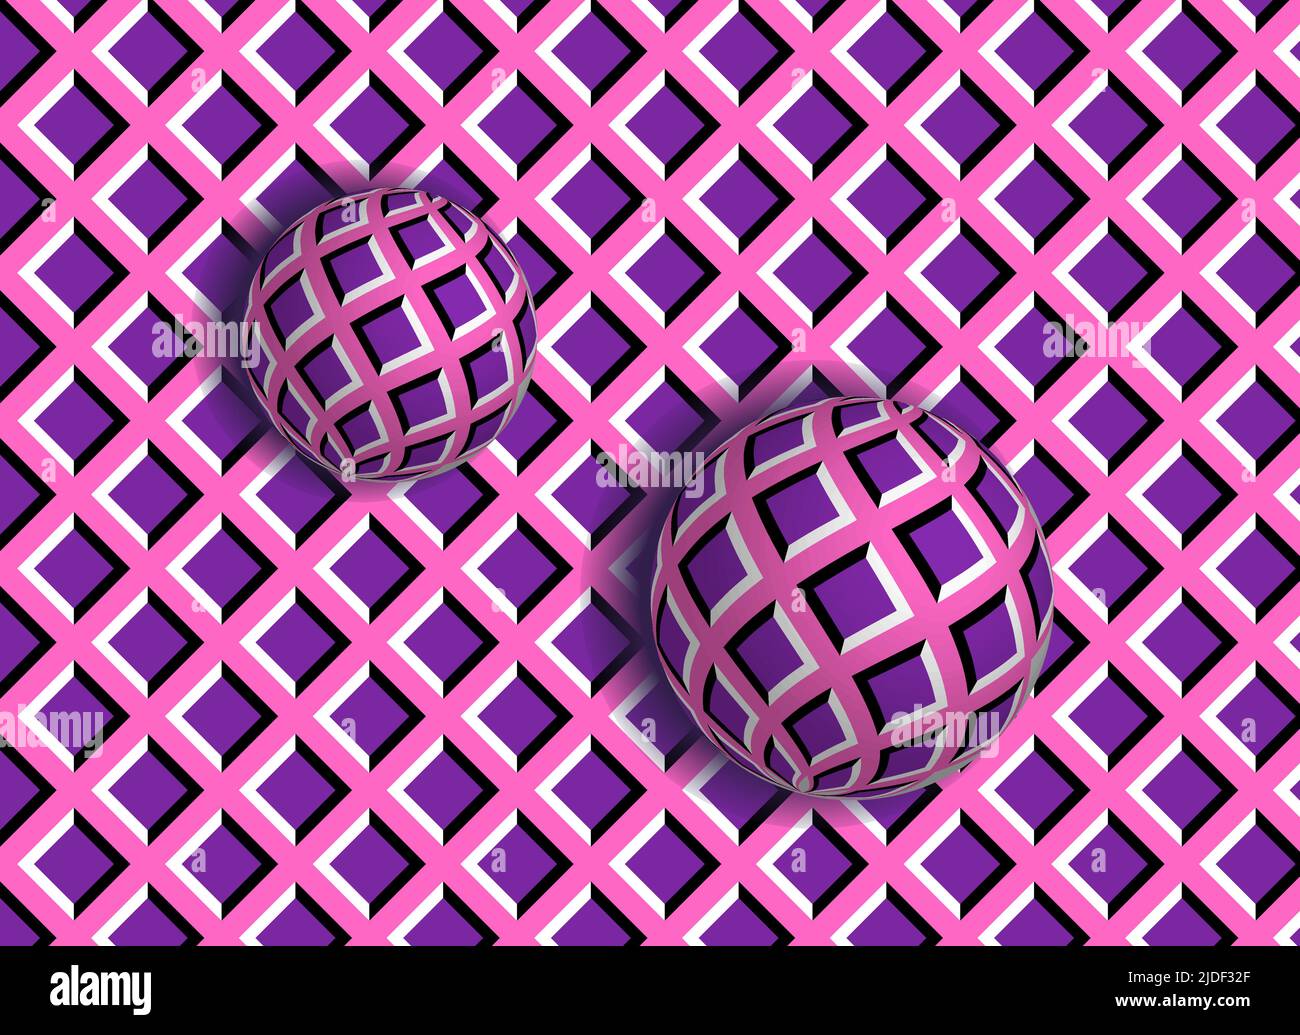 Rotating around Stock Vector Images - Alamy